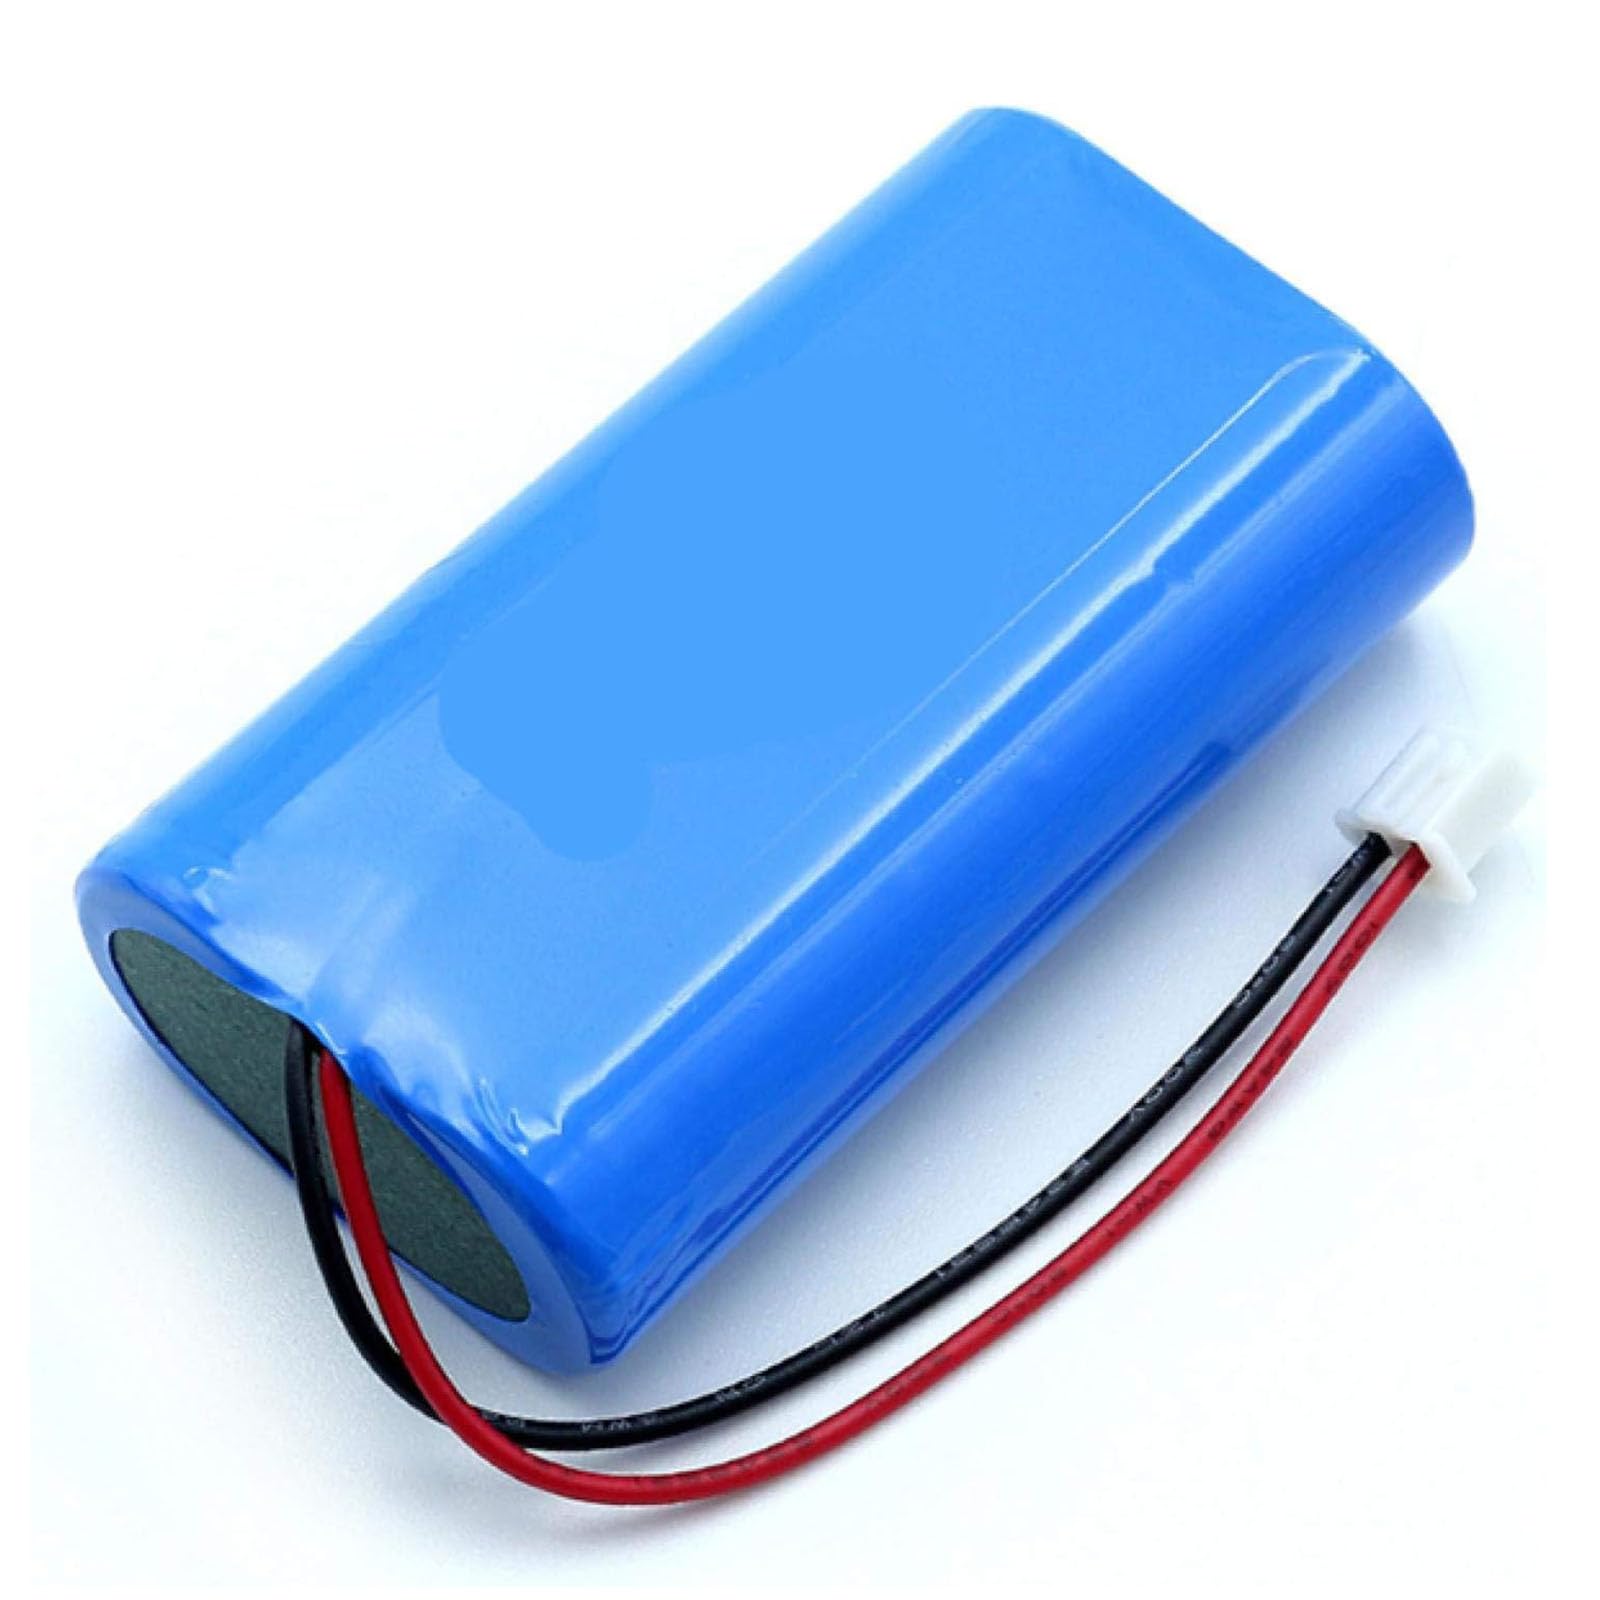 CSTAL 7.4V 2200Mah Rechargeable Lithium Ion Battery Pack, High Performance Backup Battery, with PCB and NTC, 1 Pcs